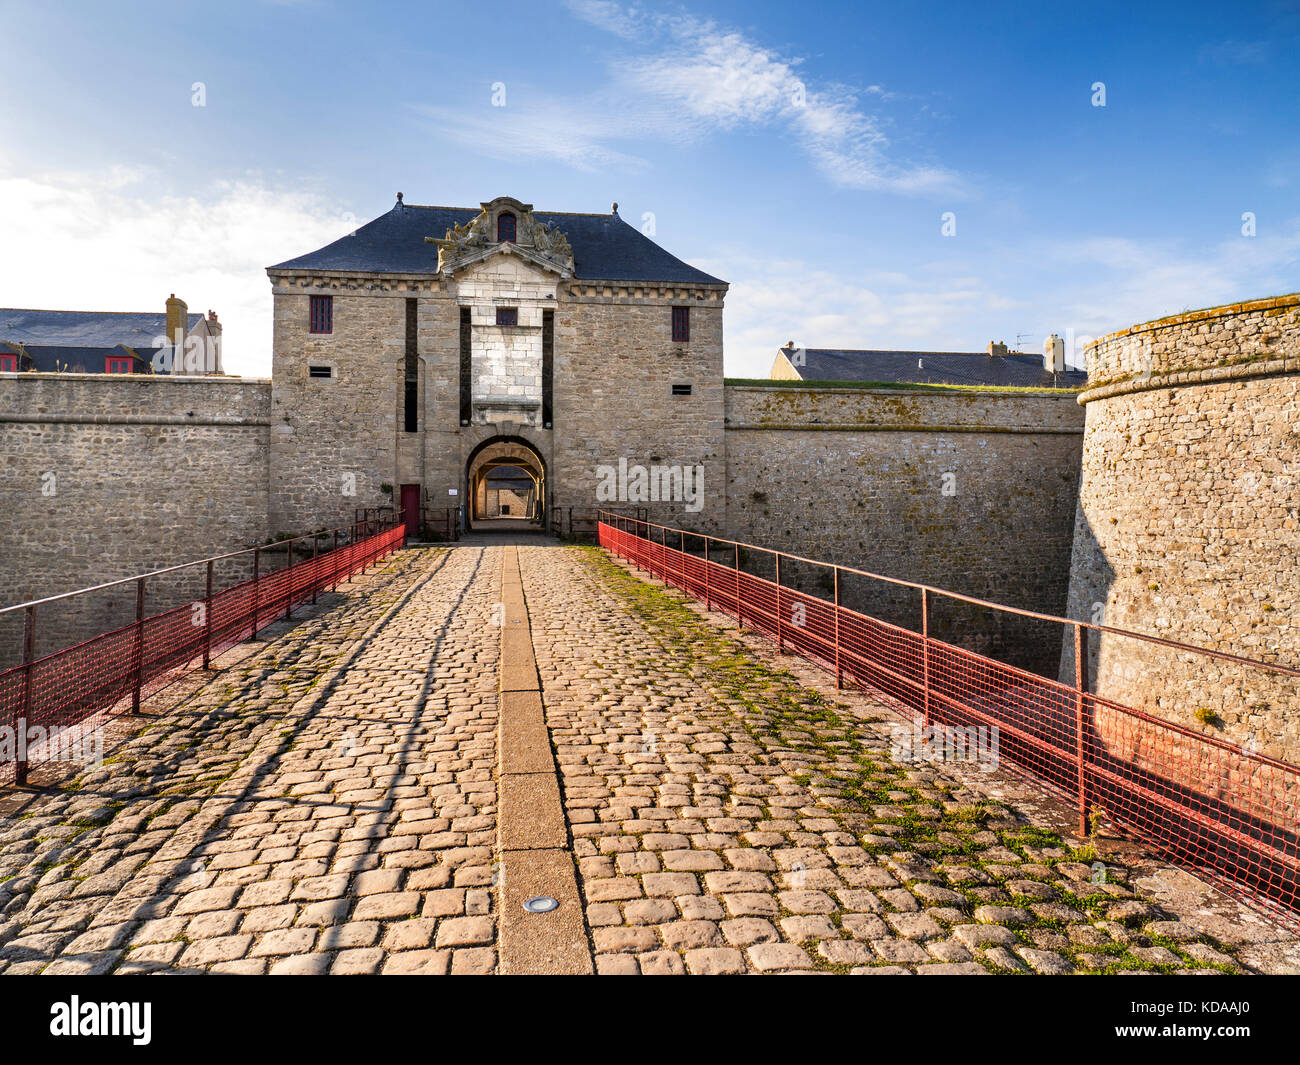 FORT Grand Entrance to La Citadelle / Citadel a coastal historic  star-shaped fort, built in 1591 in Port-Louis, Lorient, Brittany France  Stock Photo - Alamy